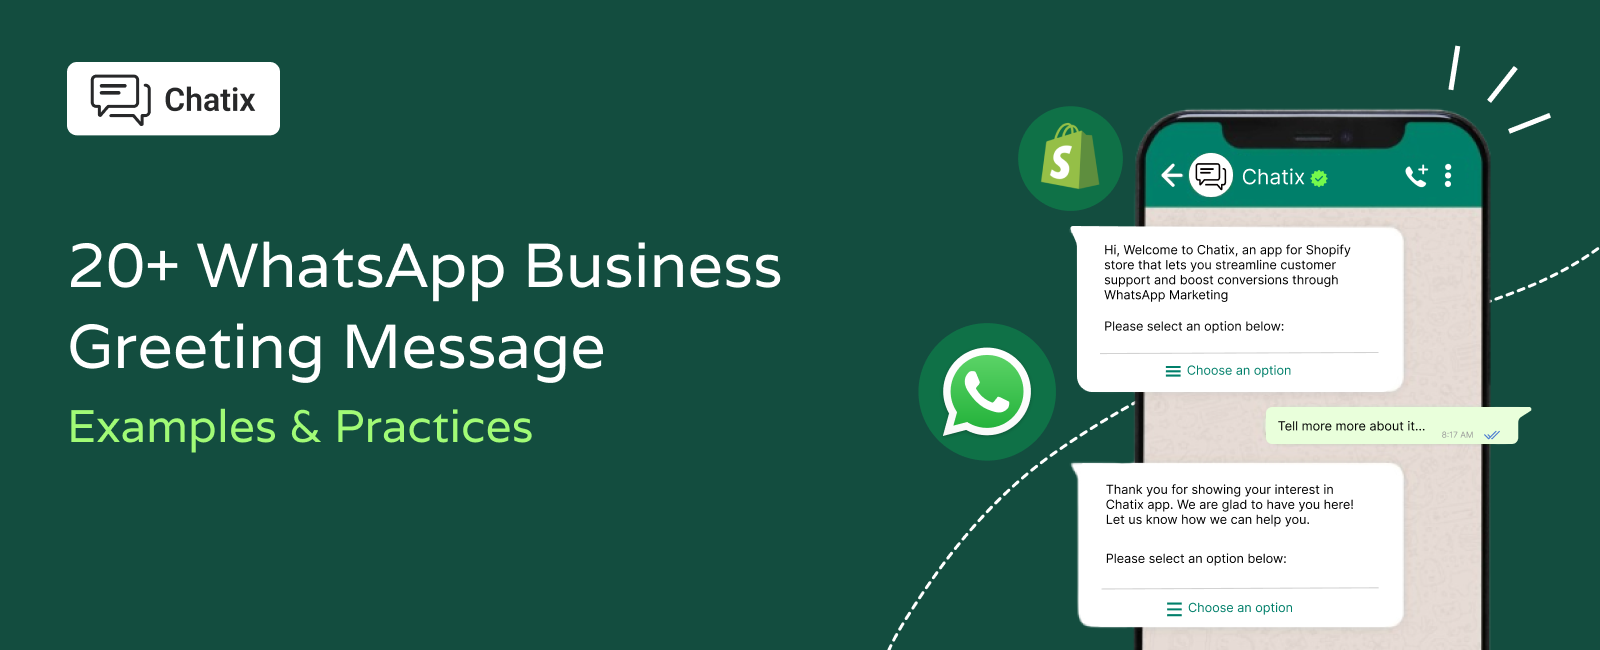 whatsapp greeting message examples